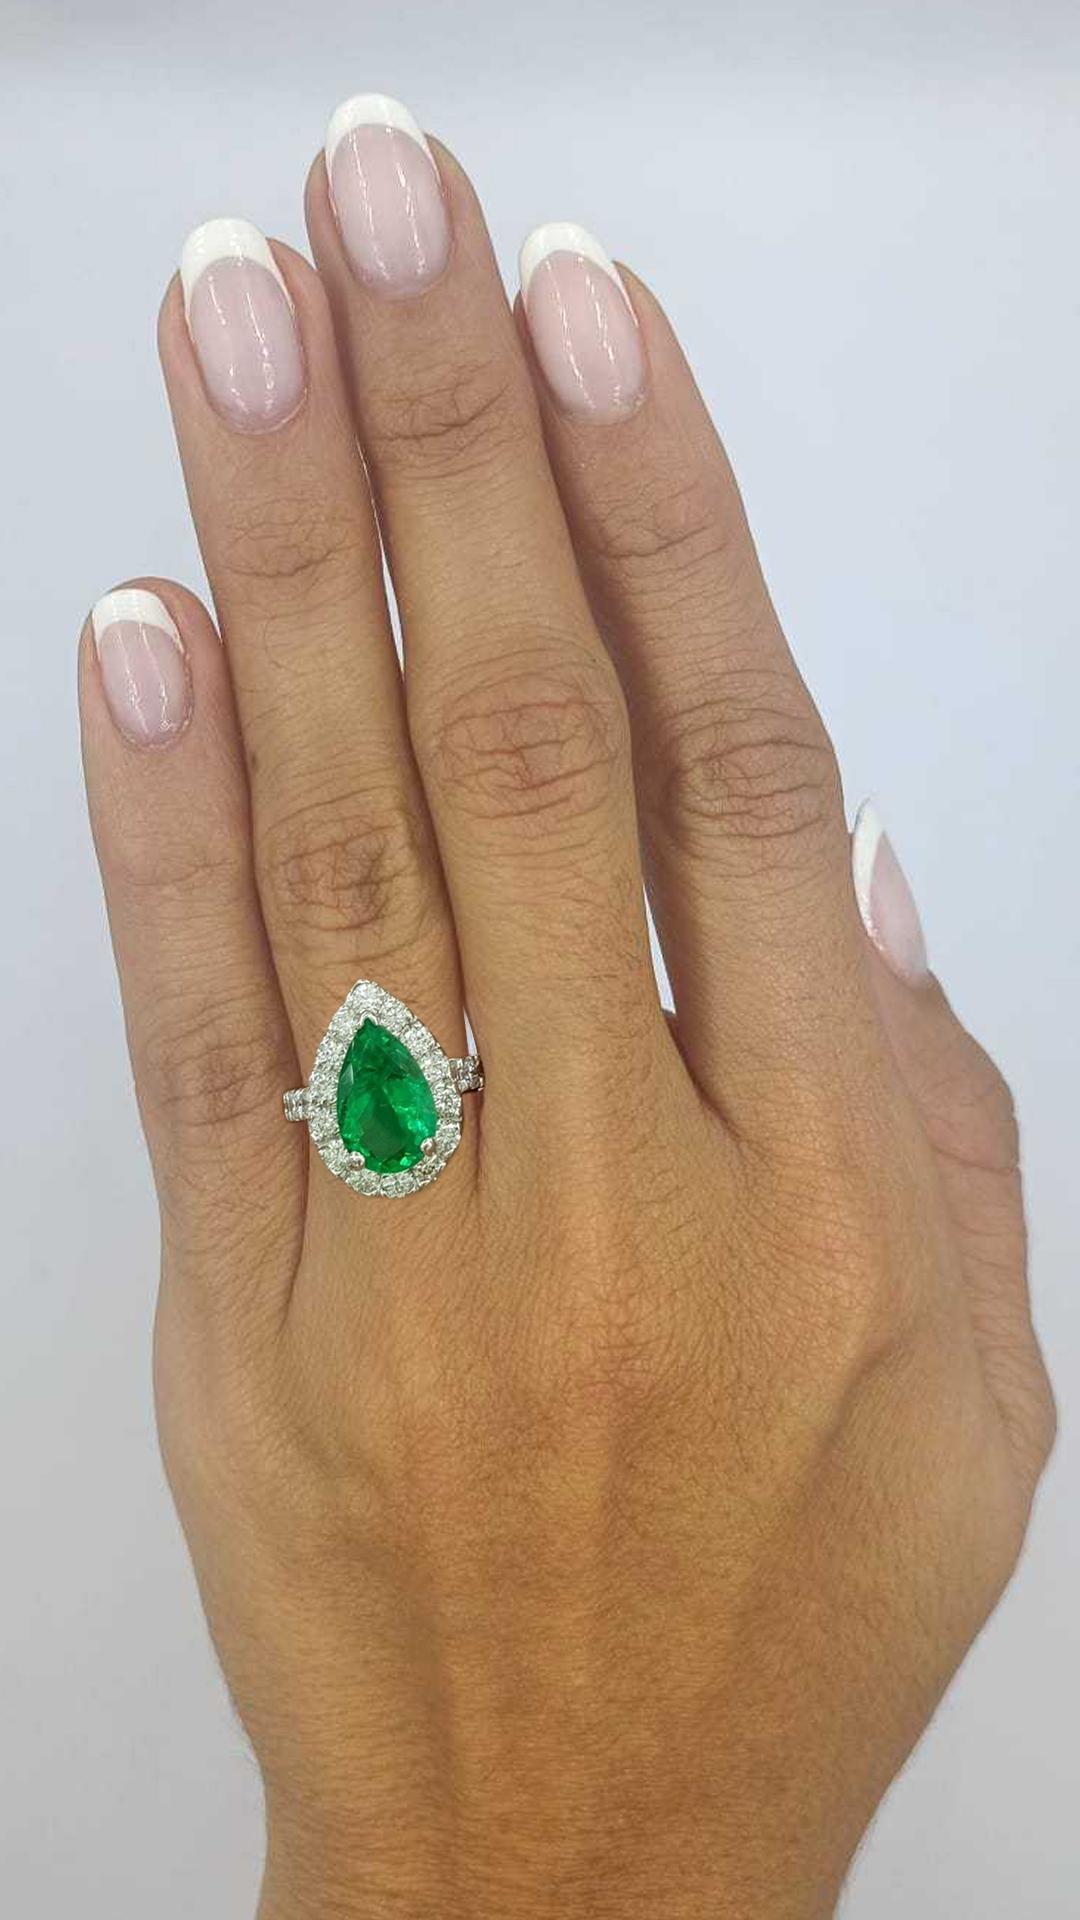 GIA NO OIL Colombian Emerald Diamond Ring
Emeralds certified as no oil are extremely rare and also colombian origin is extremely rare
